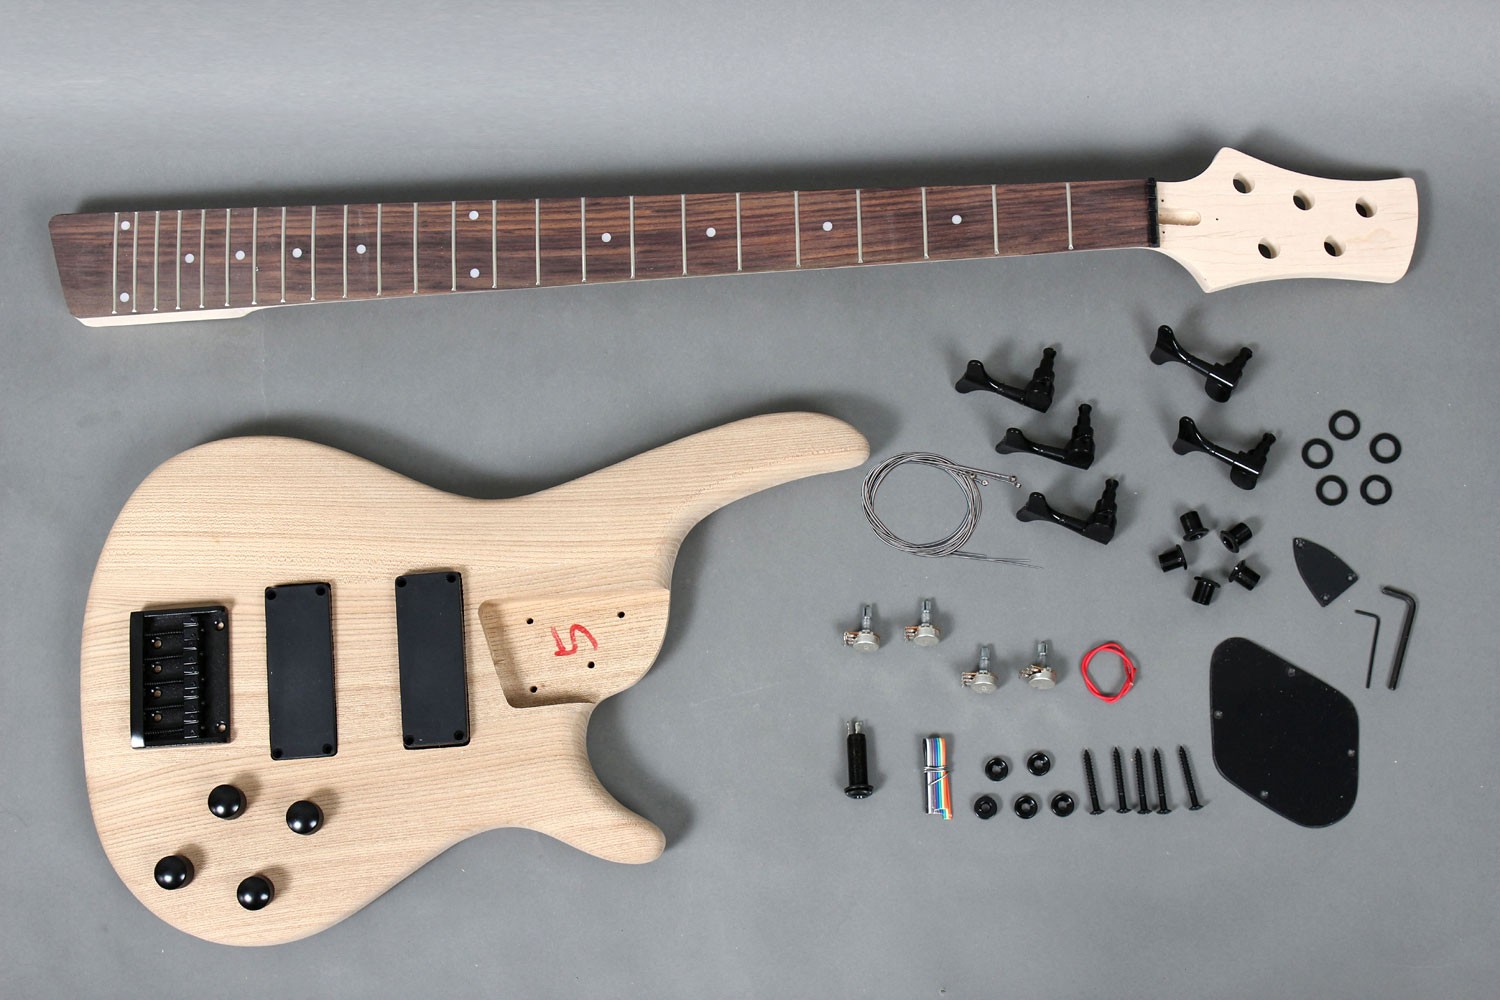 Bass Guitar Kits to Build WOW Image Results